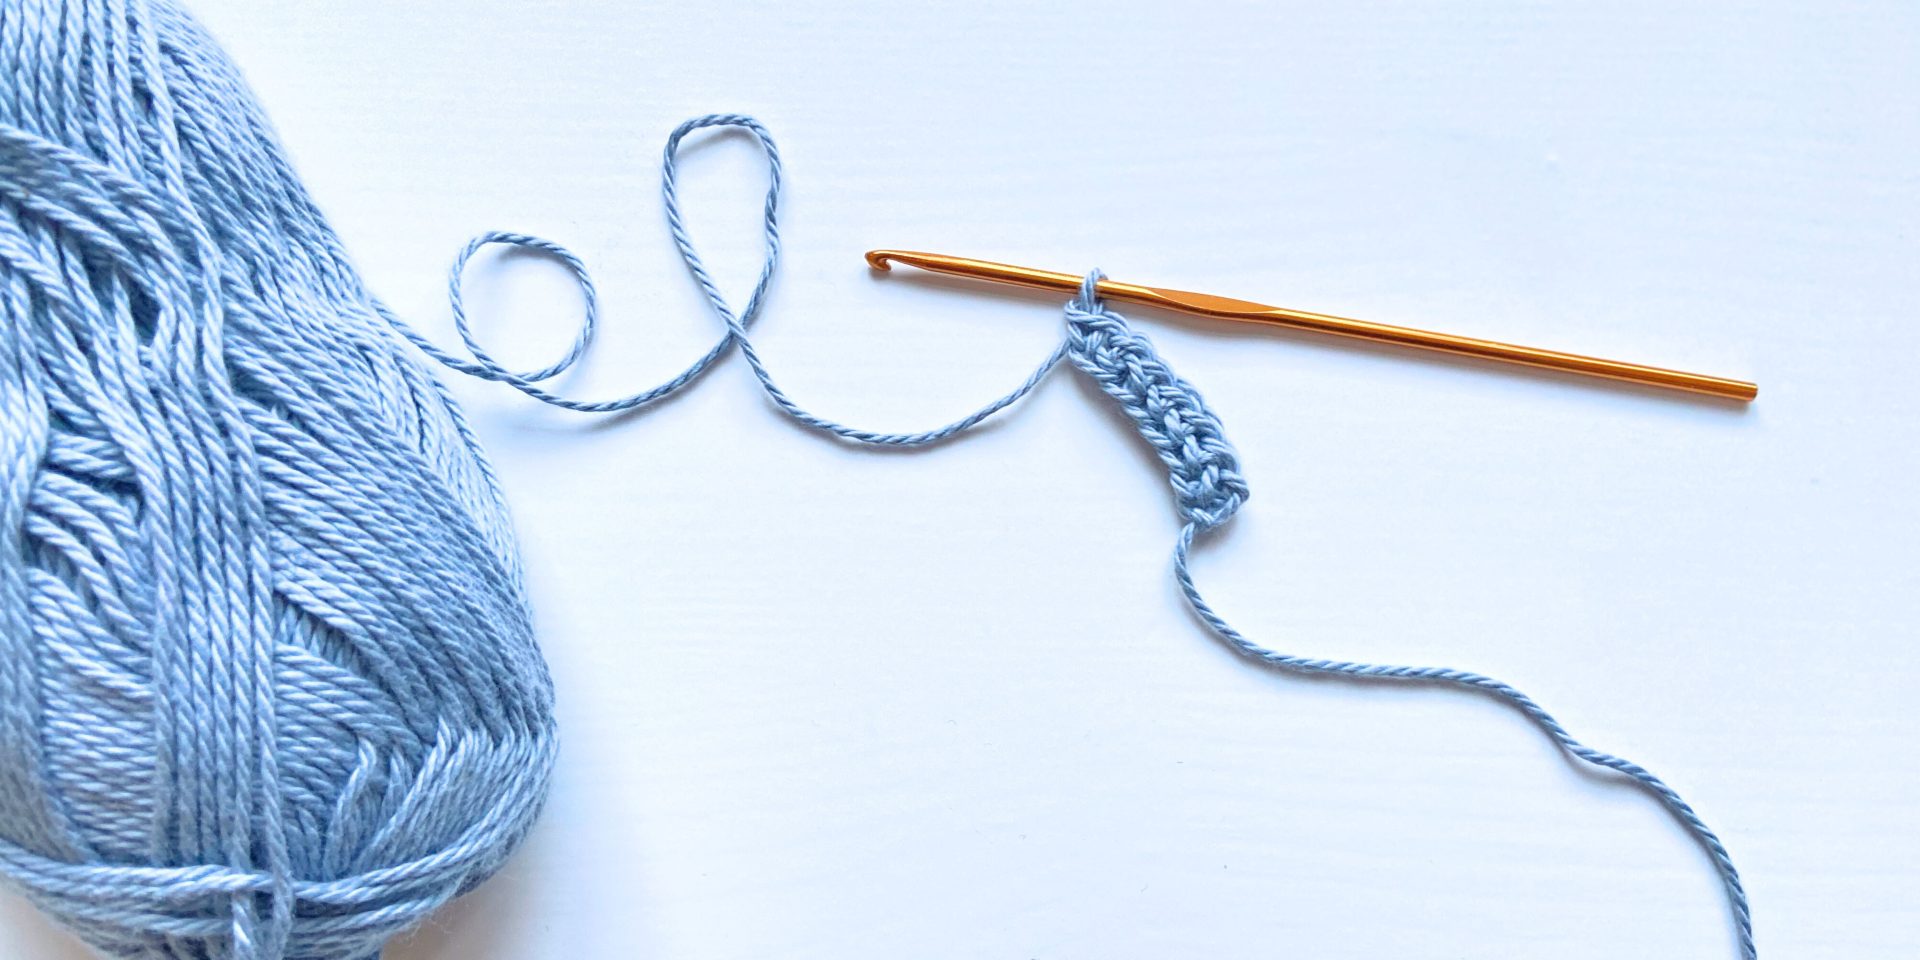 What would you do with a 788 yards of wool yarn? I've got it from   for a project when I first started crocheting, I didn't know the types of  yarn at